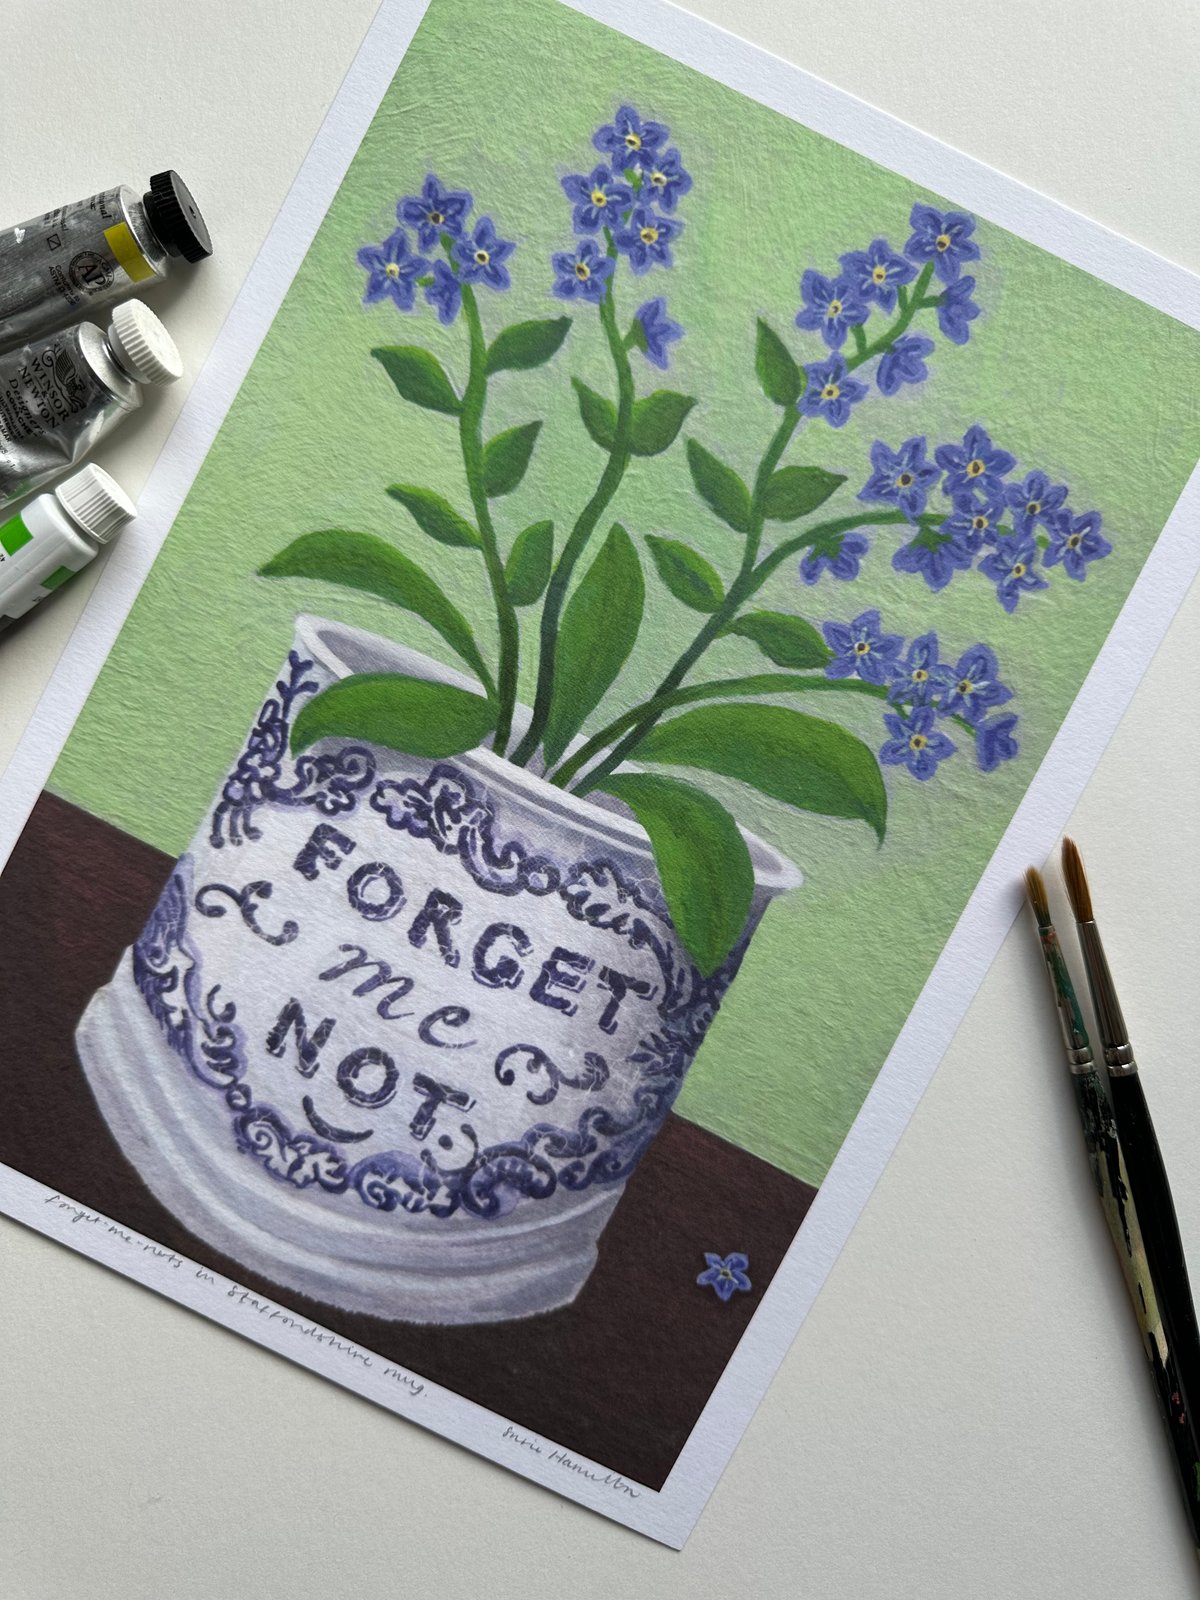 Forget-Me-Nots in Staffordshire Mug Print & Card